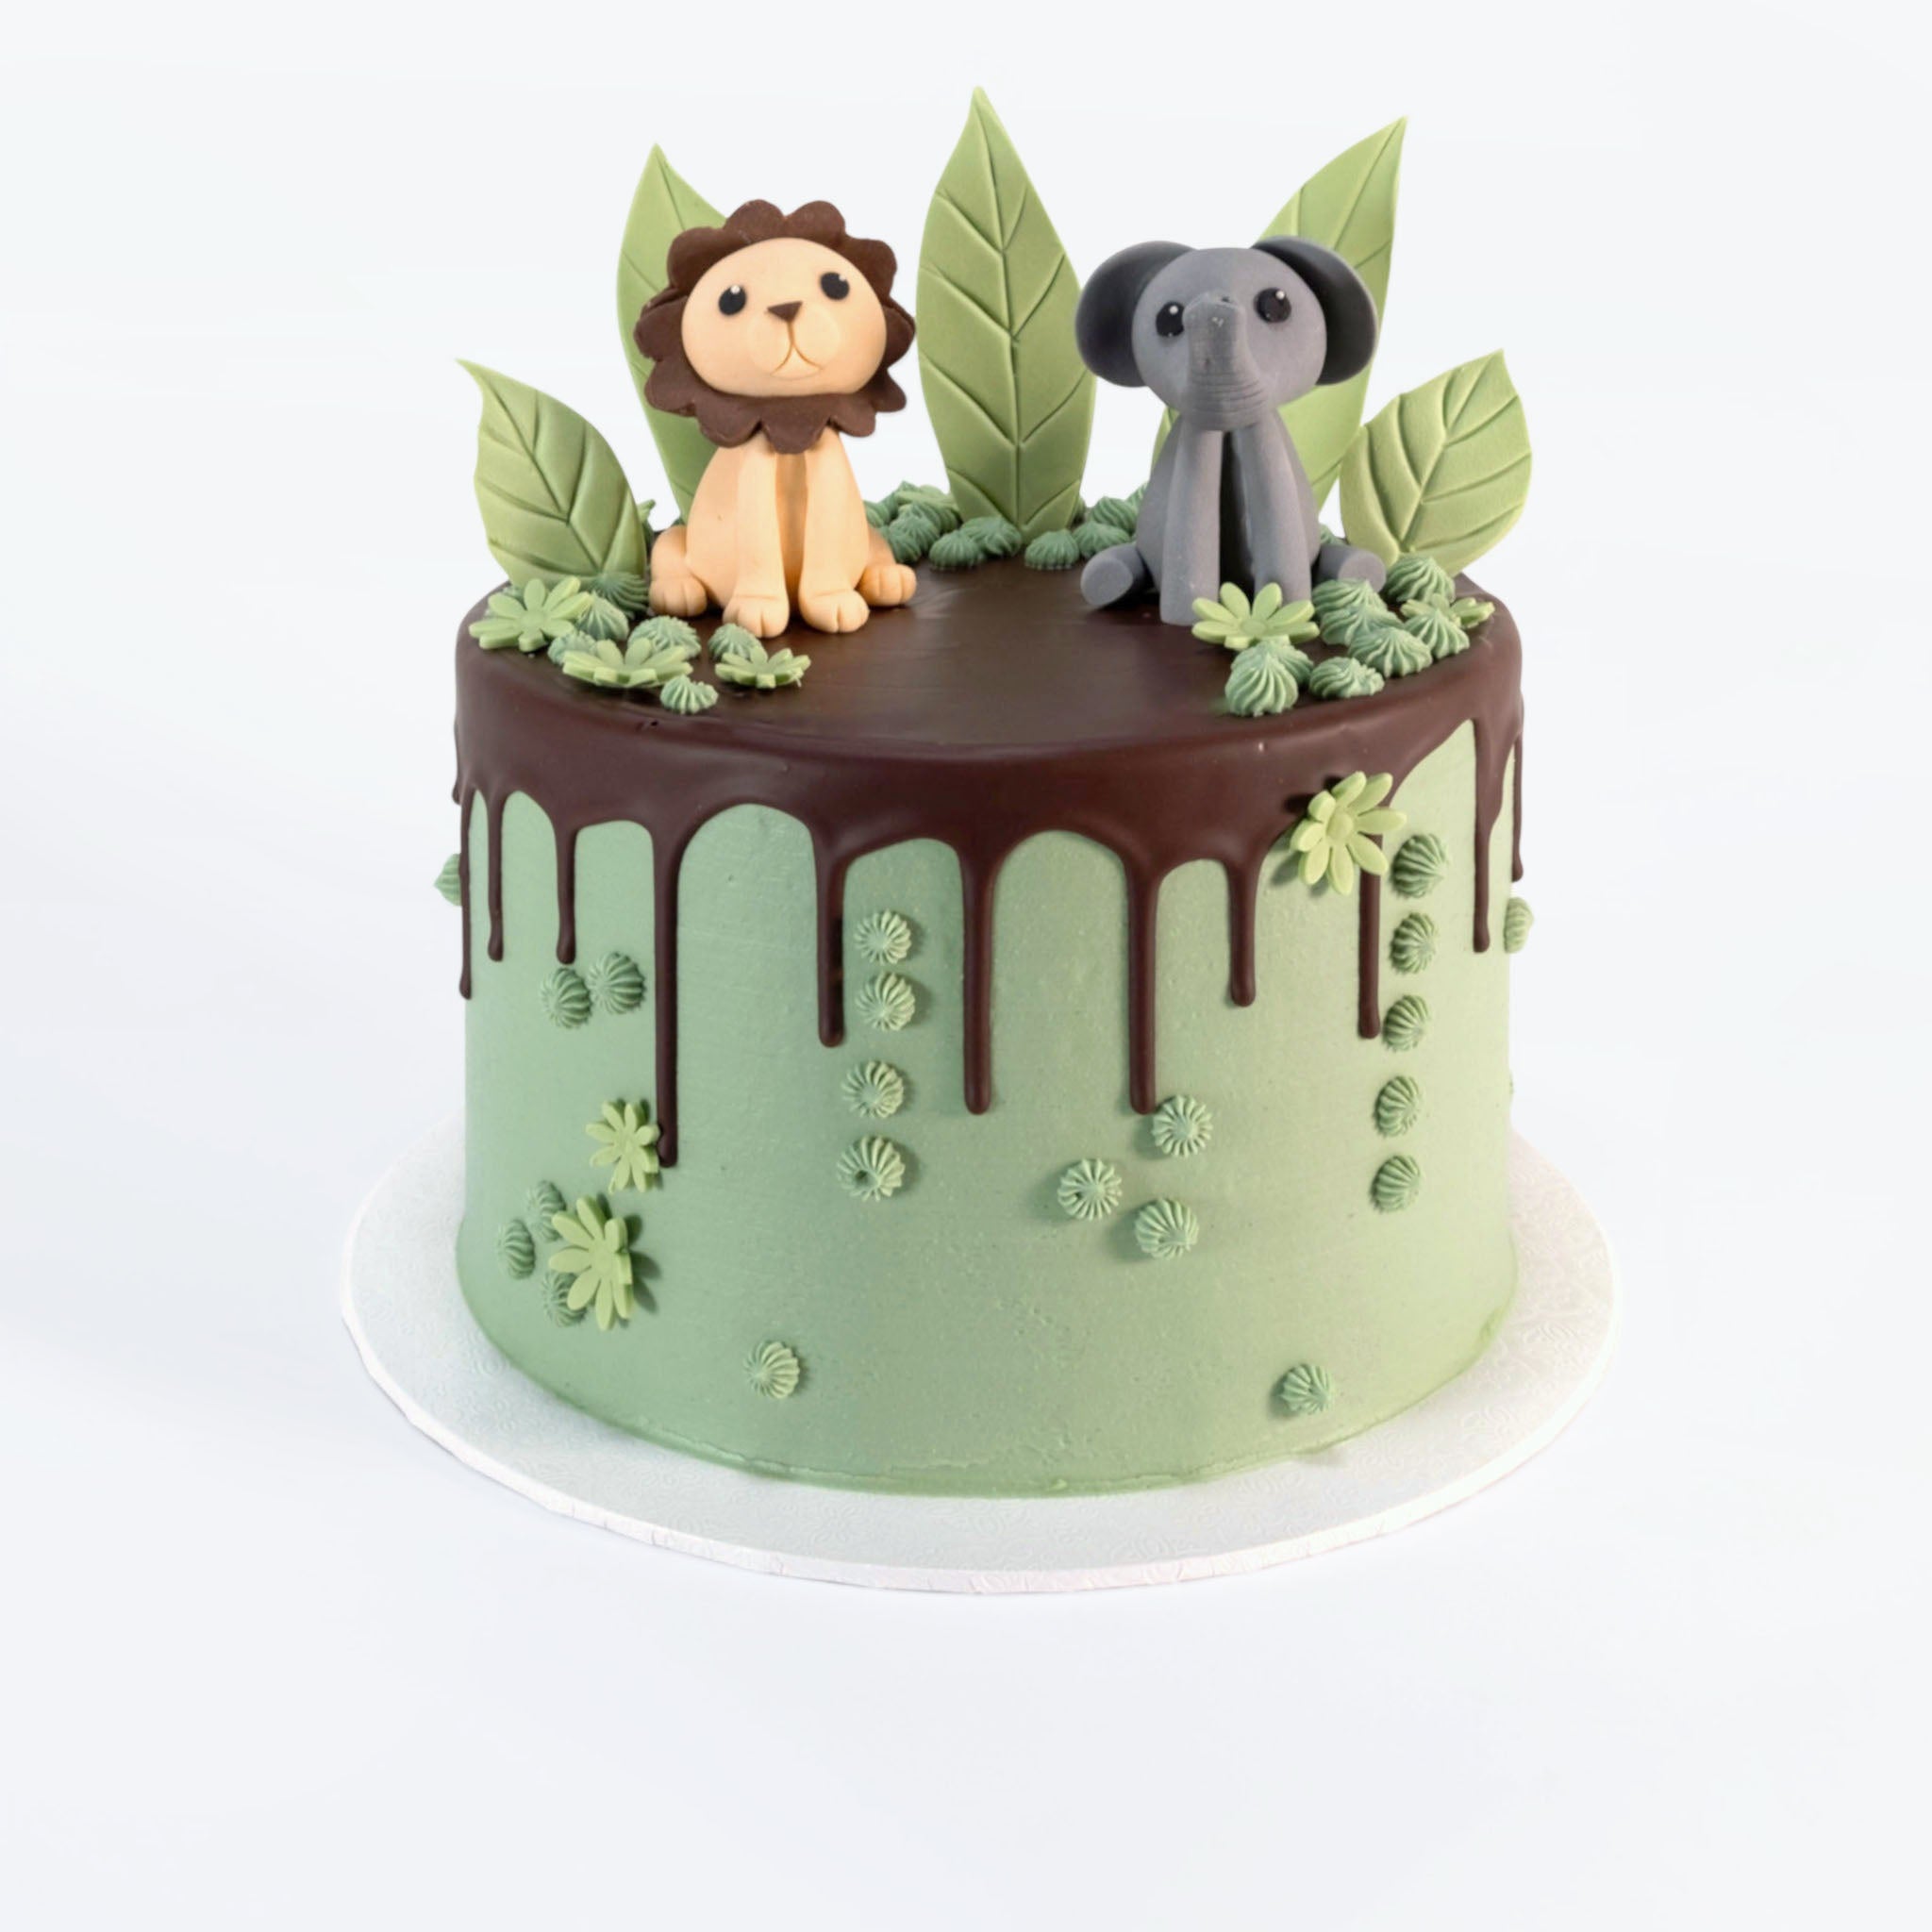 34 Two Wild Birthday Cake Ideas : Jungle Cake with Pearls